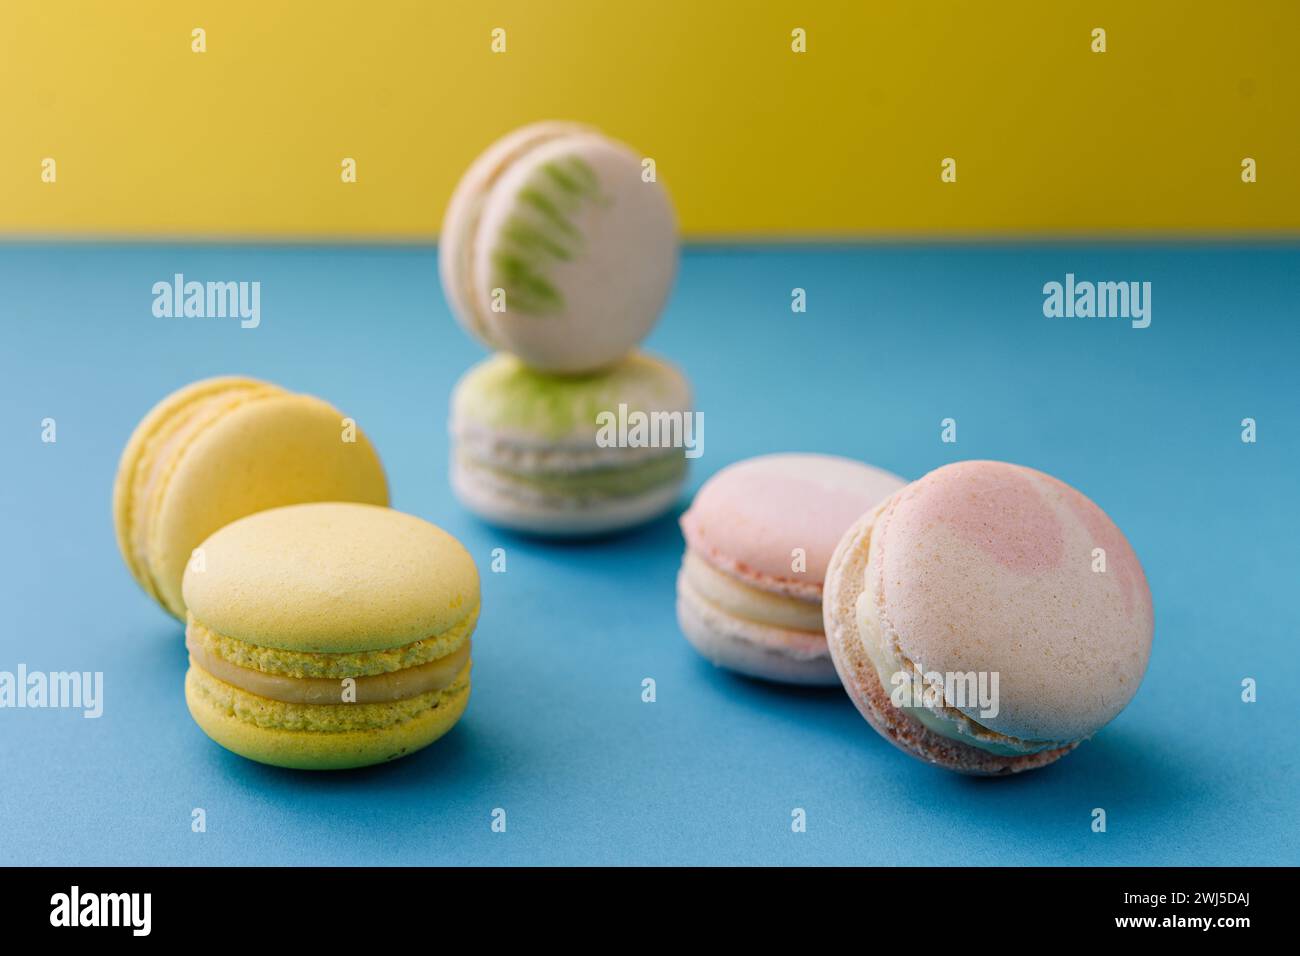 Sweet and colorful macaroons on blue with yellow background Stock Photo